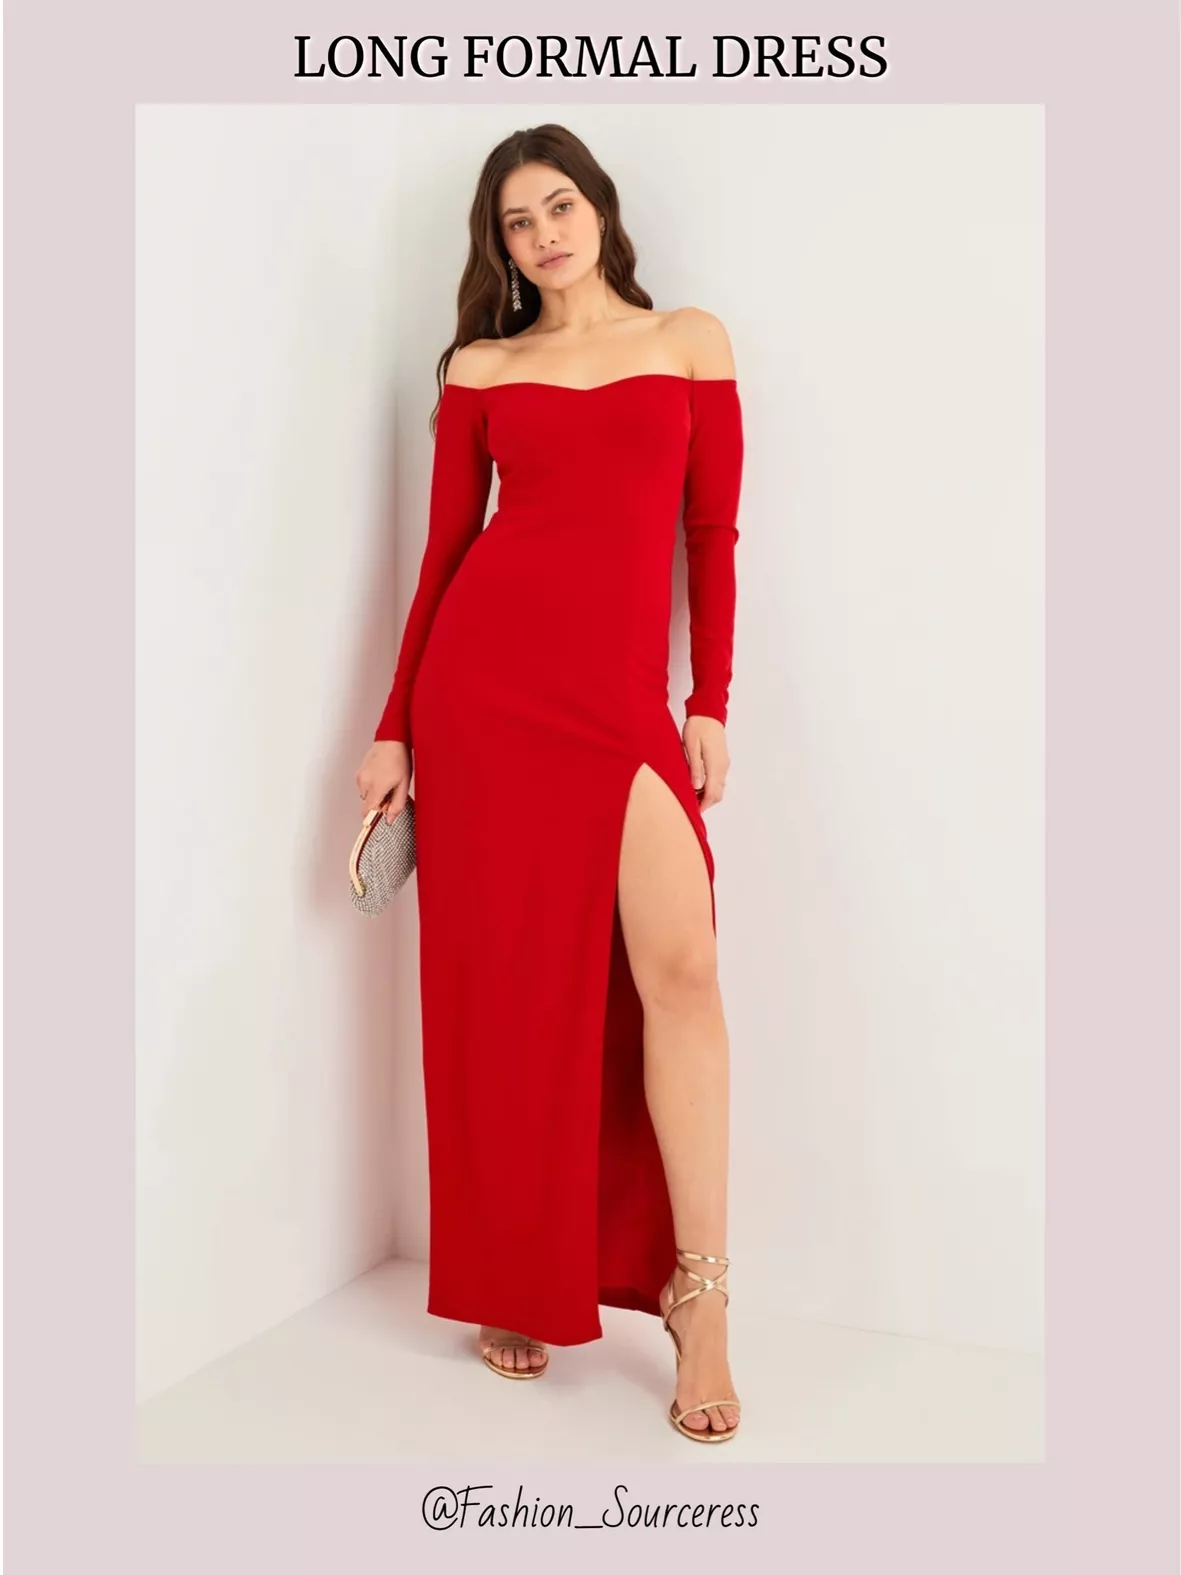 Photo Finish Red Sequin Lace-Up Maxi Dress